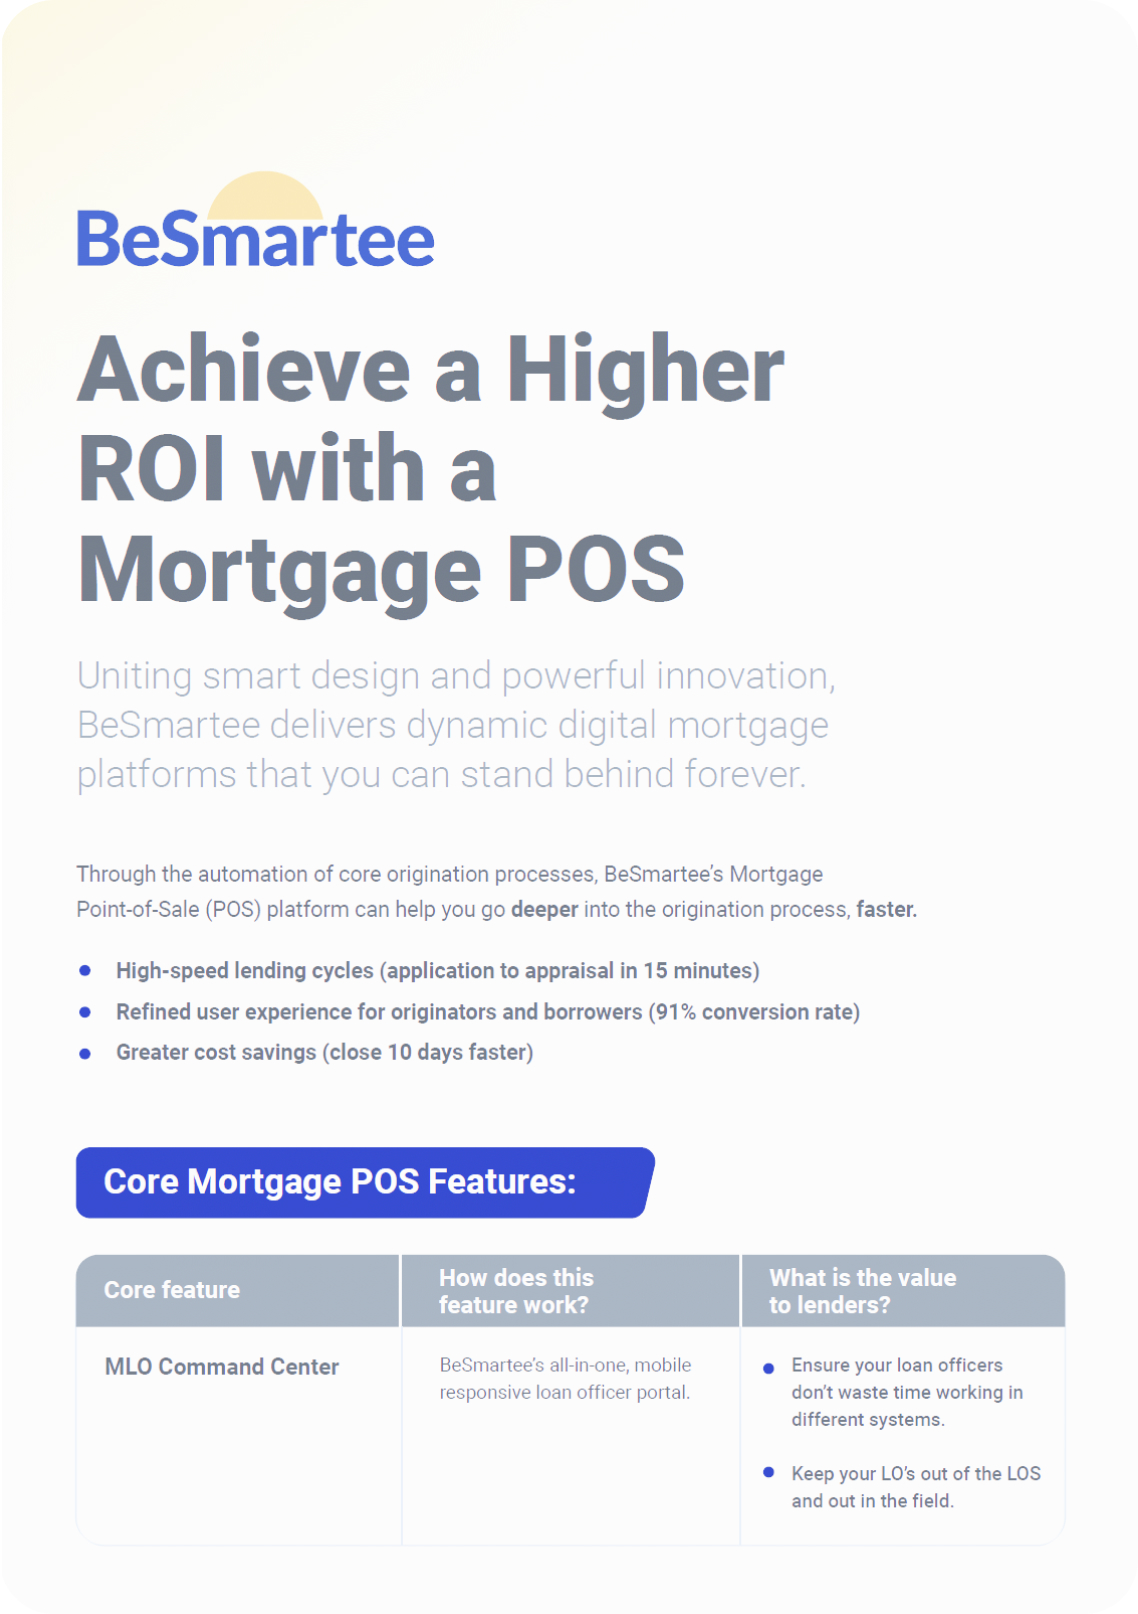 Achieve a Higher ROI with a Mortgage POS